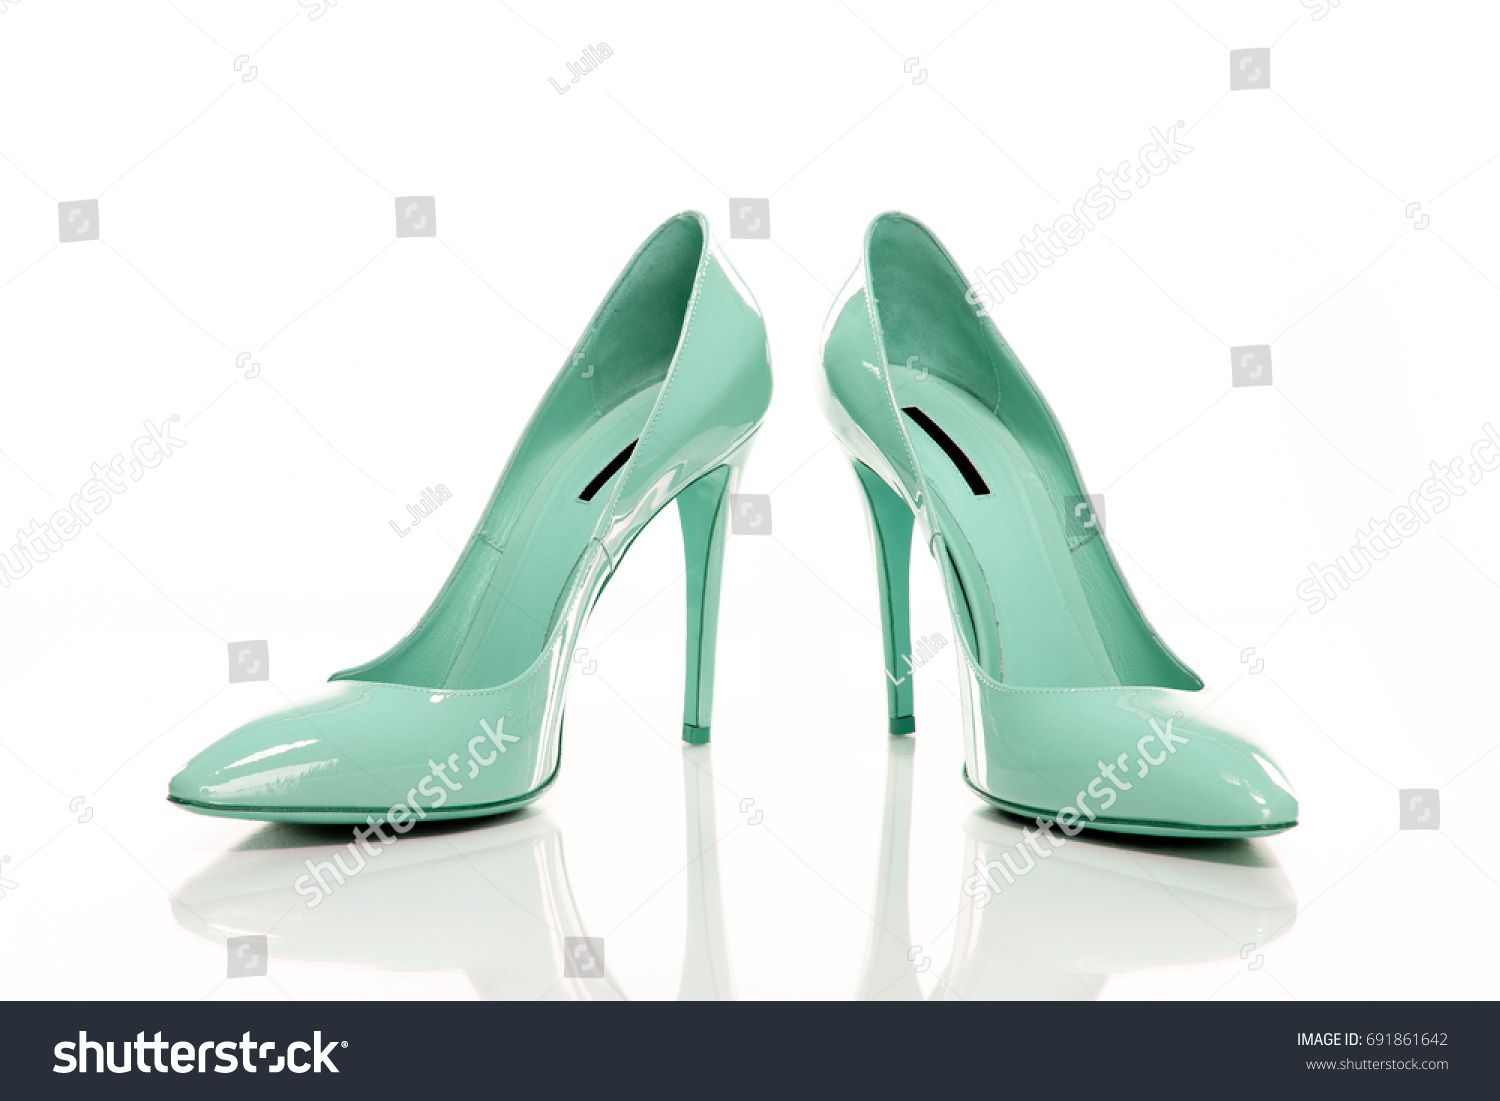 45,871 Mint green fashion Images, Stock Photos & Vectors | Shutterstock